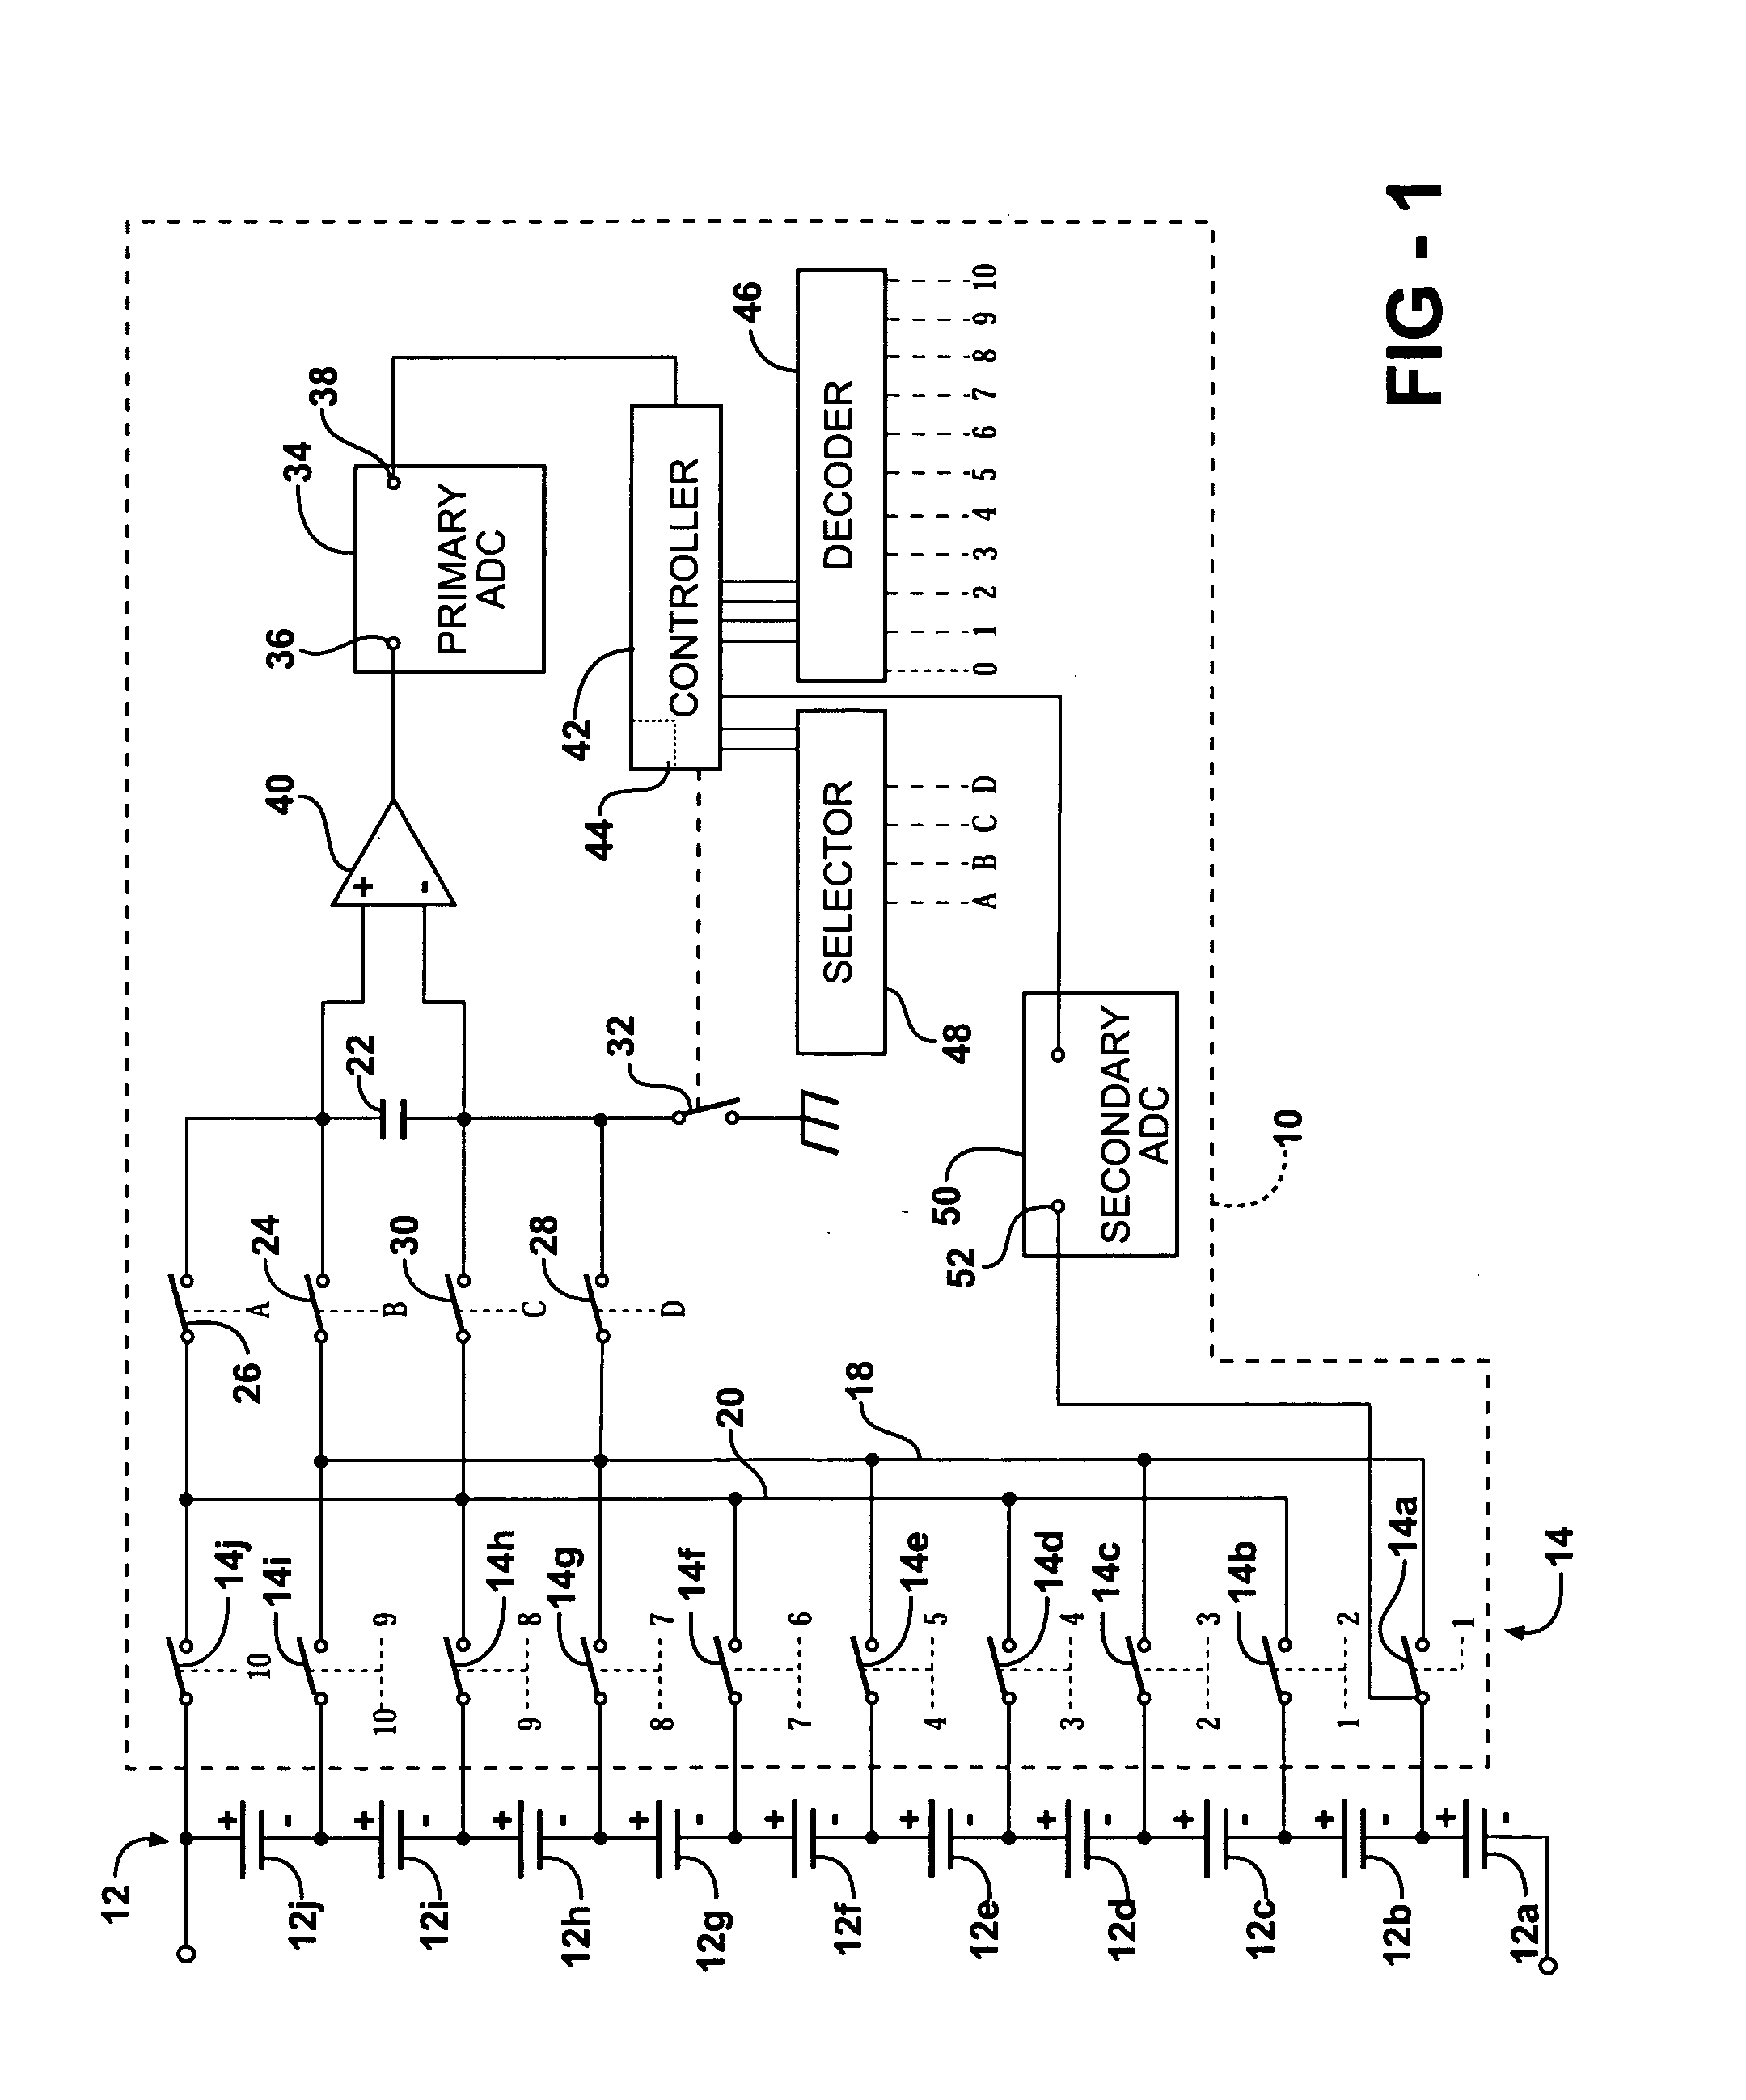 System and Method to Measure Series-Connected Cell Voltages and Verify Measurement Accuracy